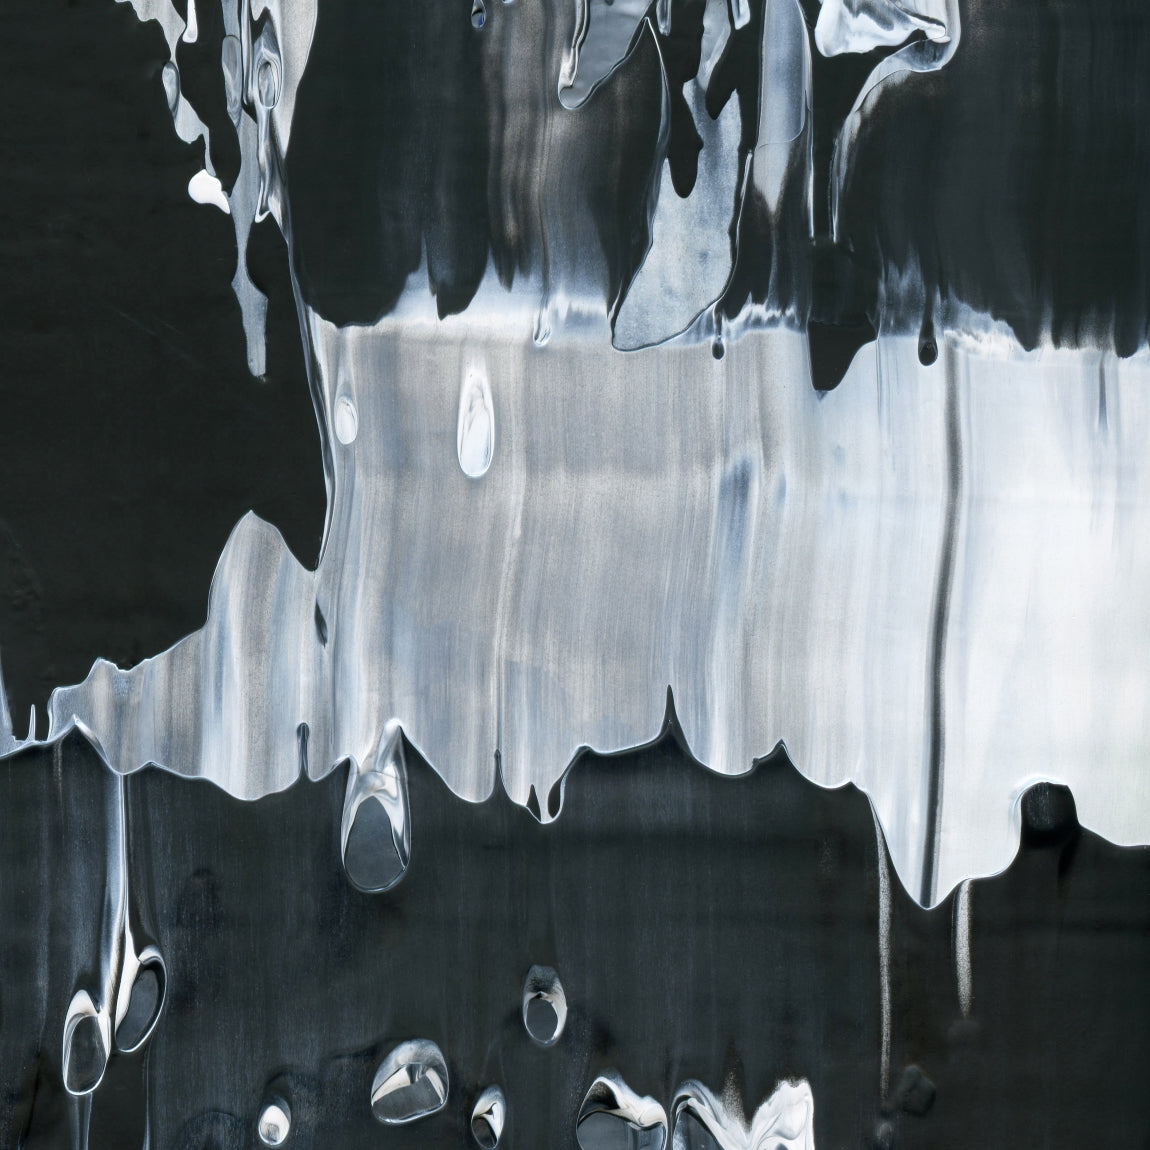 Curios of Chaos D4 is an abstract oil-on-canvas artwork, a fractal of its parent painting Curios of Chaos created by Anna Judd for the Scales Collection.